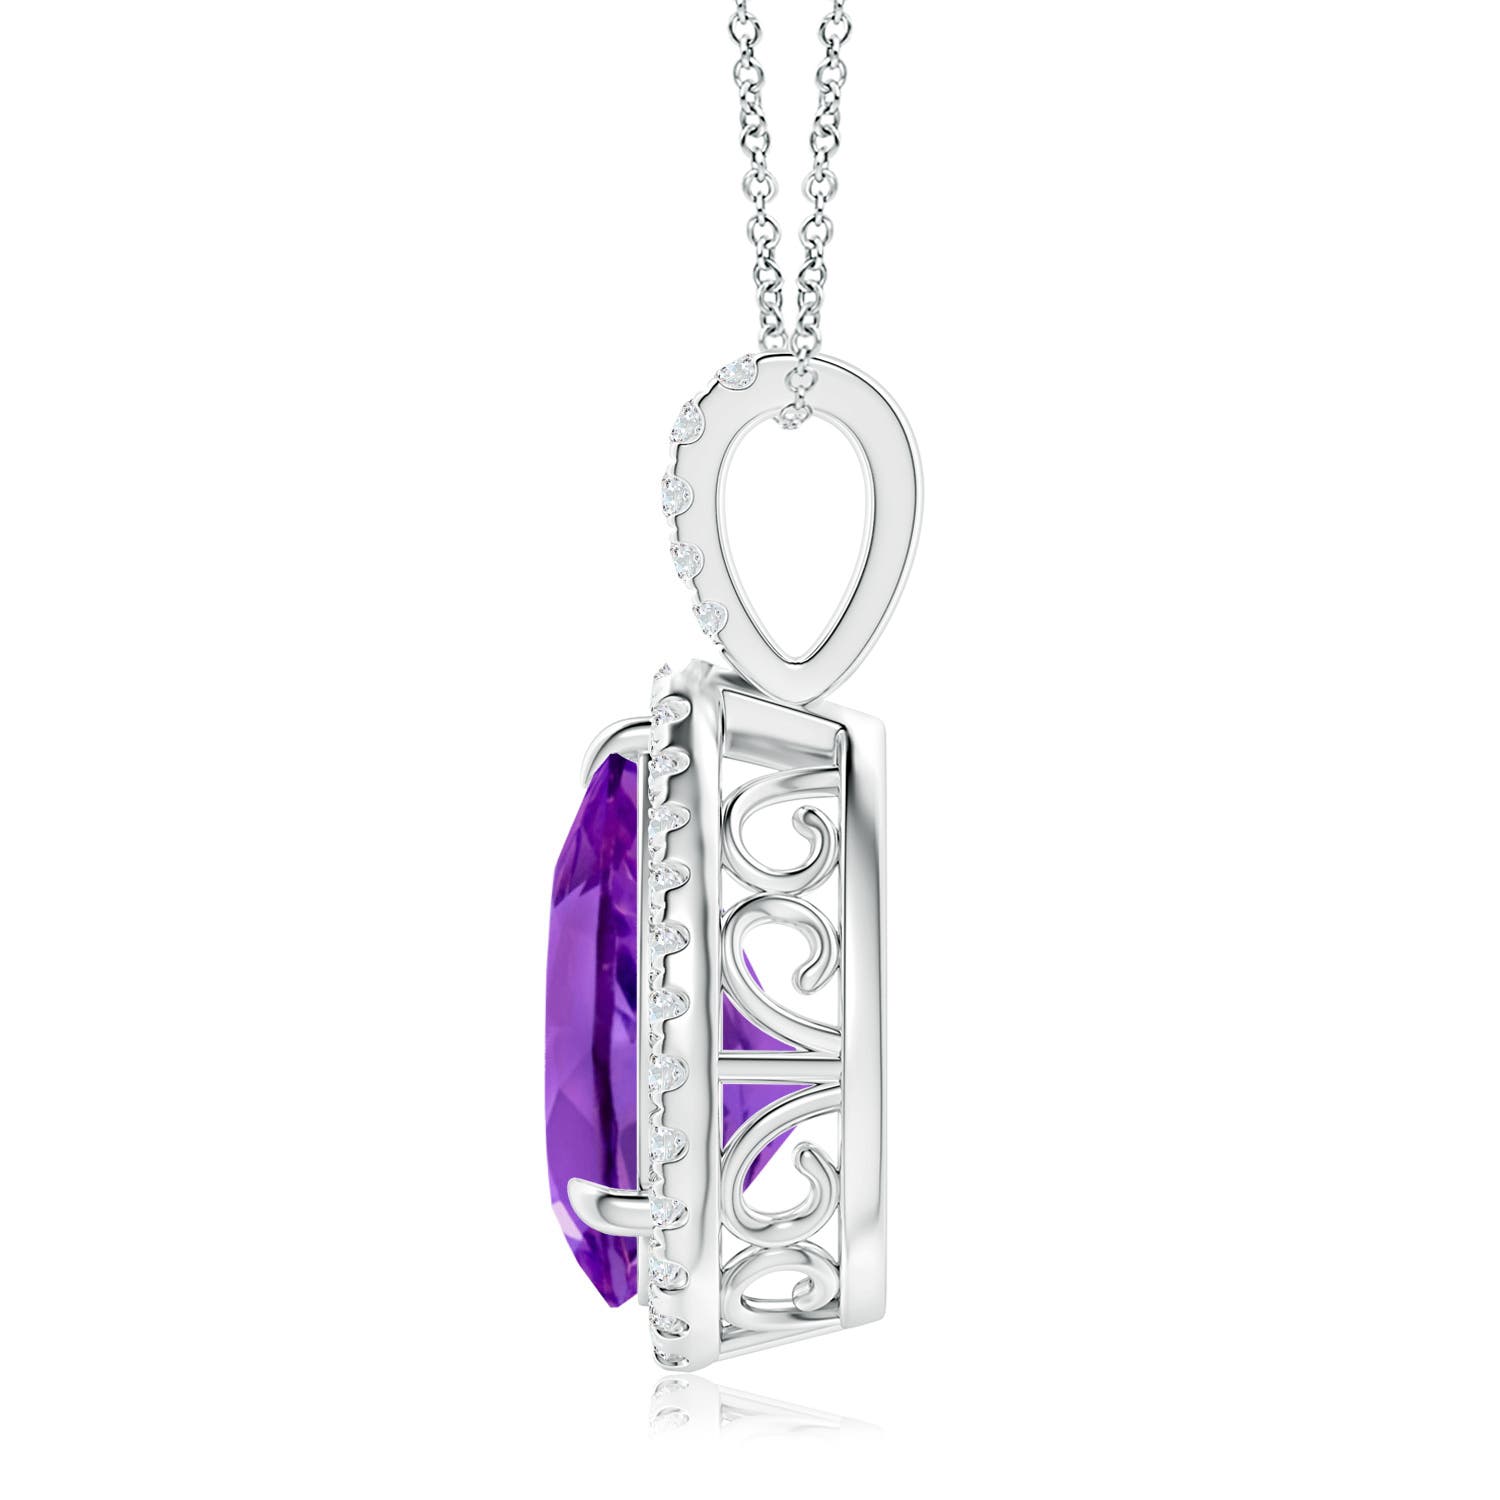 AAA - Amethyst / 2.85 CT / 14 KT White Gold